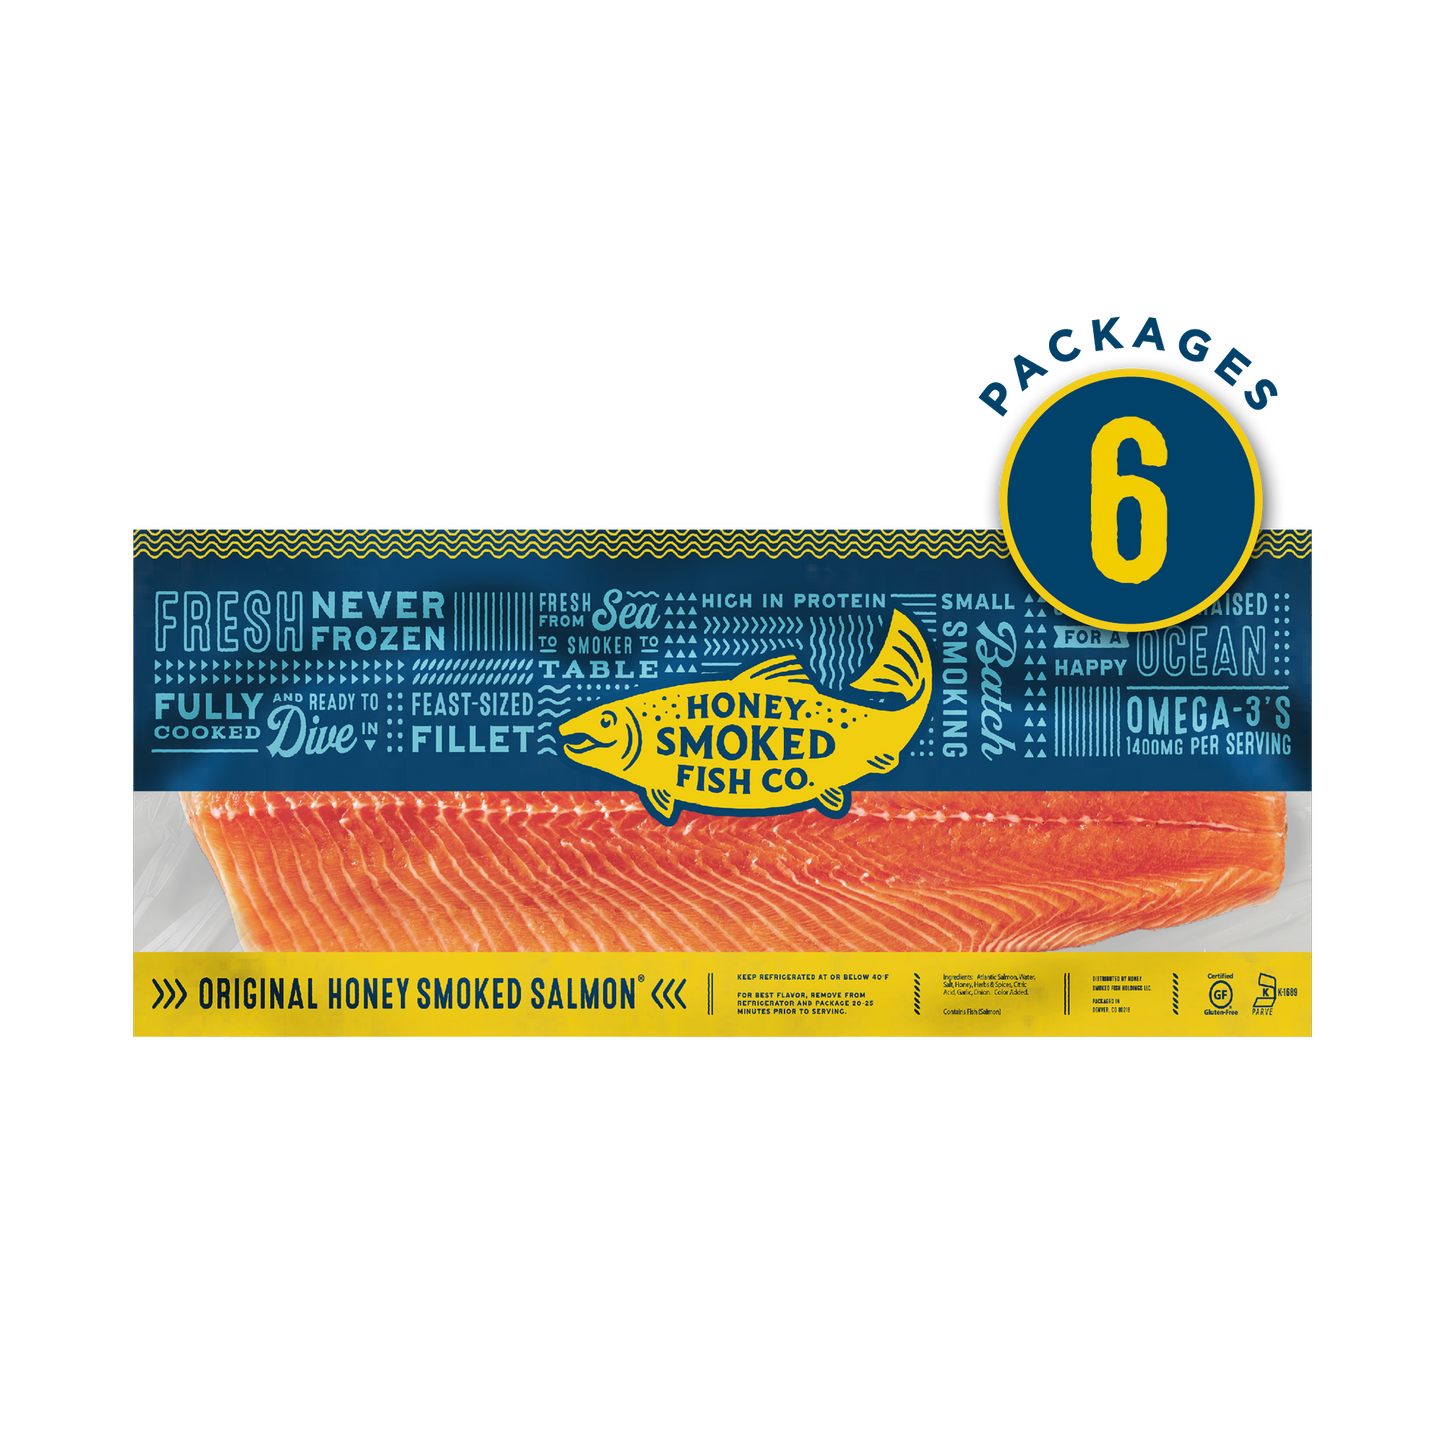 Original Honey Smoked Salmon® — 6 Packages of Whole Sides